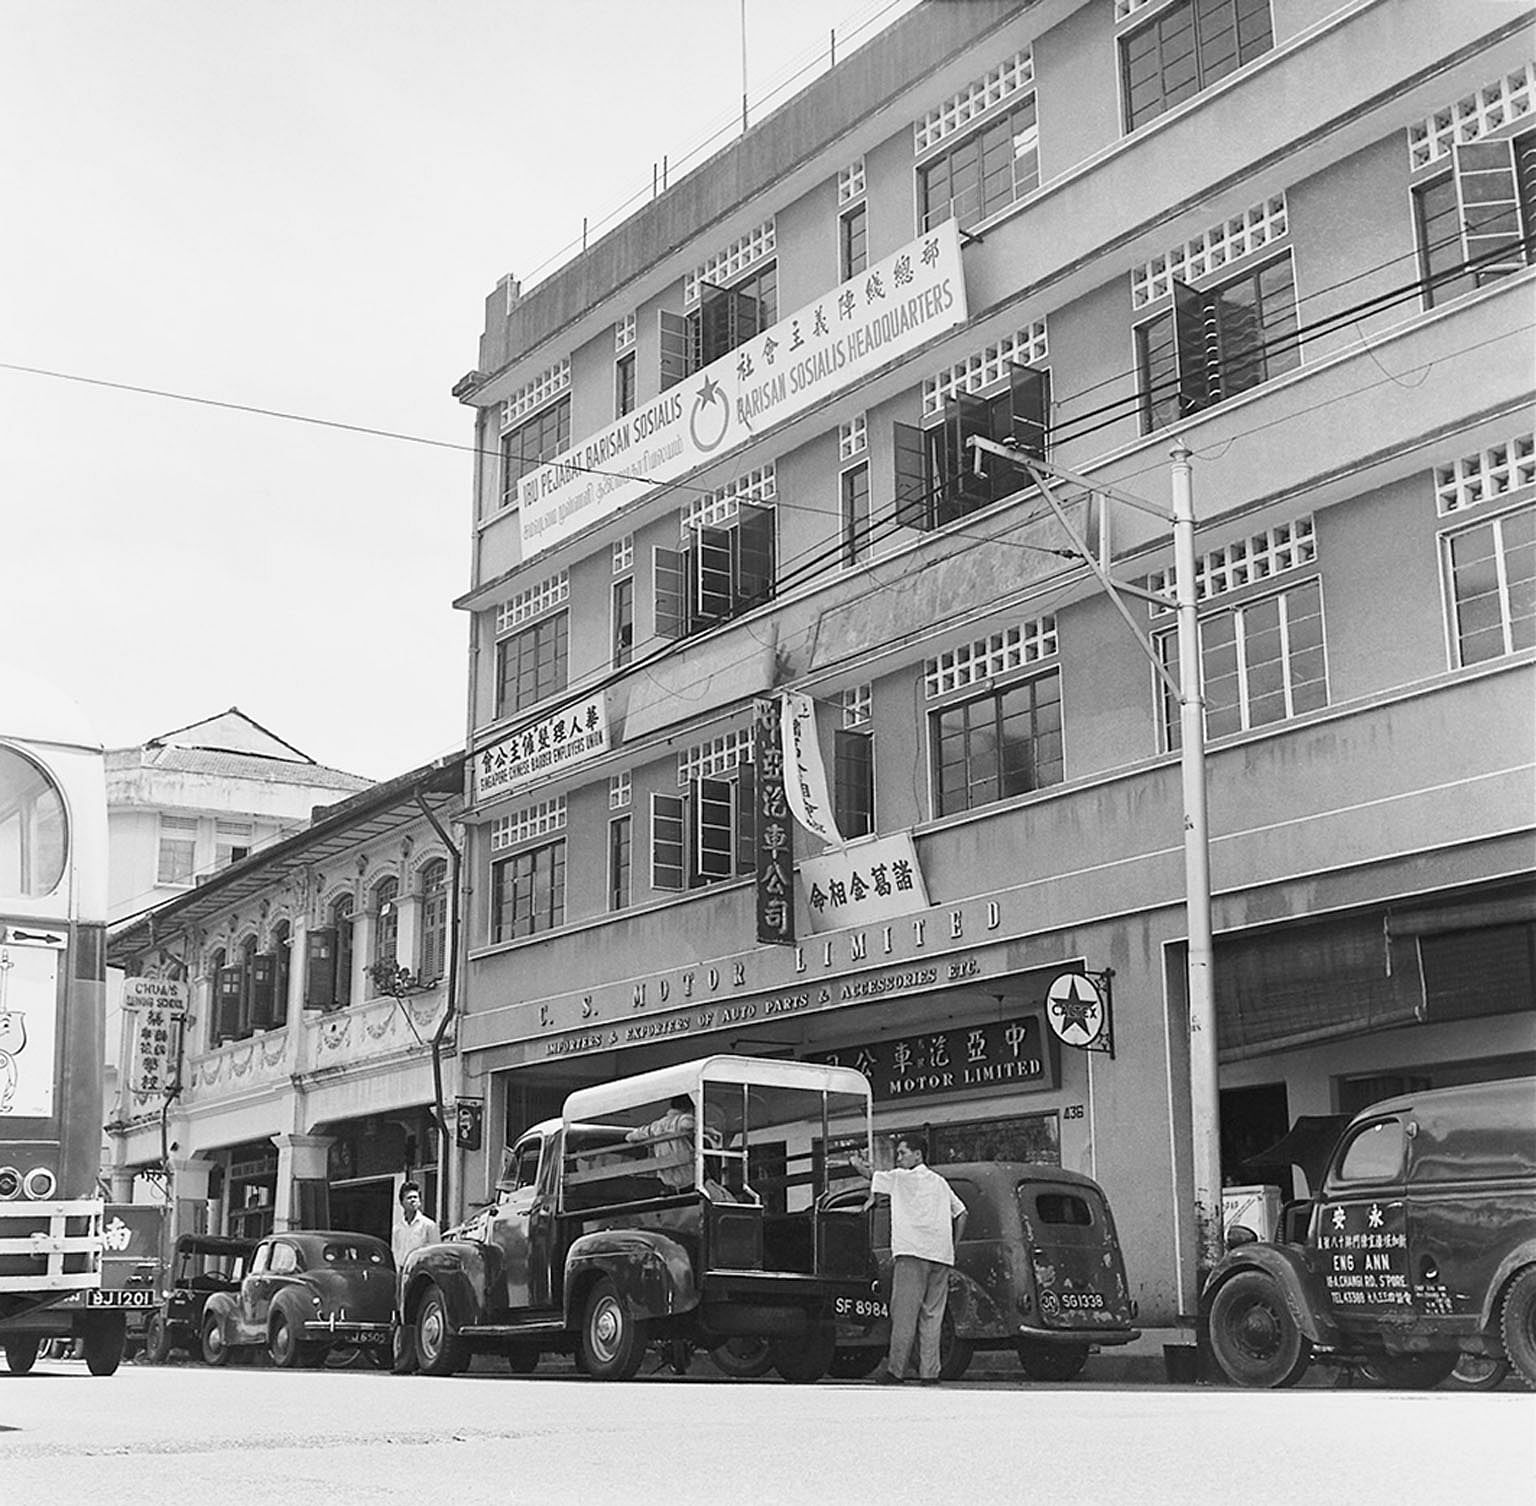 Officers from the Special Branch raiding the headquarters of the Barisan Sosialis in Victoria Street on Feb 2, 1963. Dr Thum Ping Tjin's argument, that Operation Coldstore was mounted for political and not security reasons, is an example of misinform